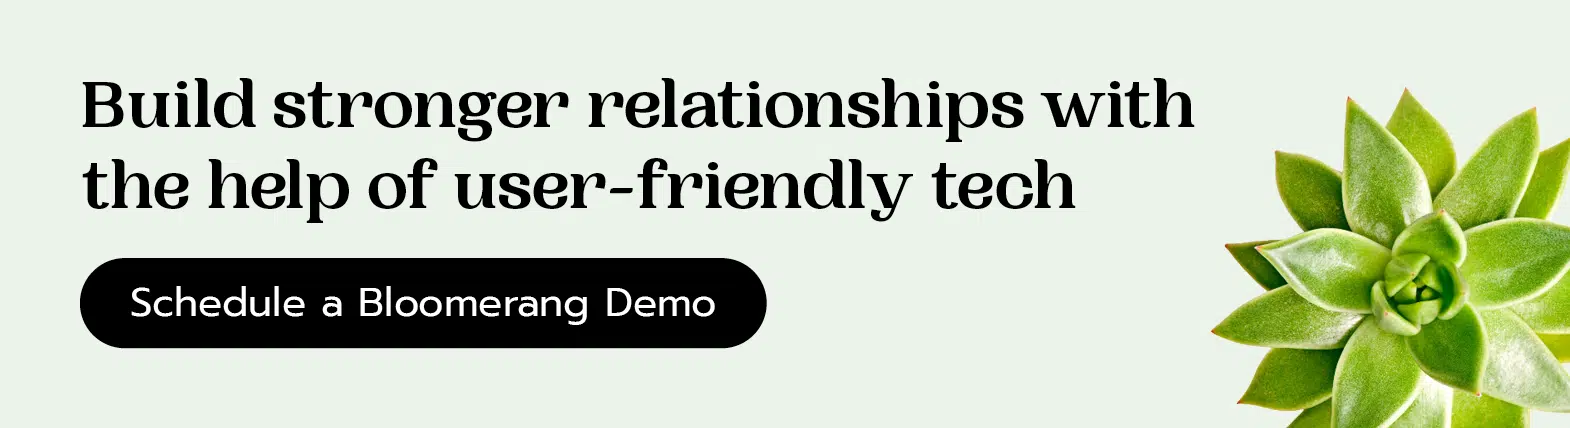 Build stronger relationships with the help of user-friendly tech. Schedule a Bloomerang demo.